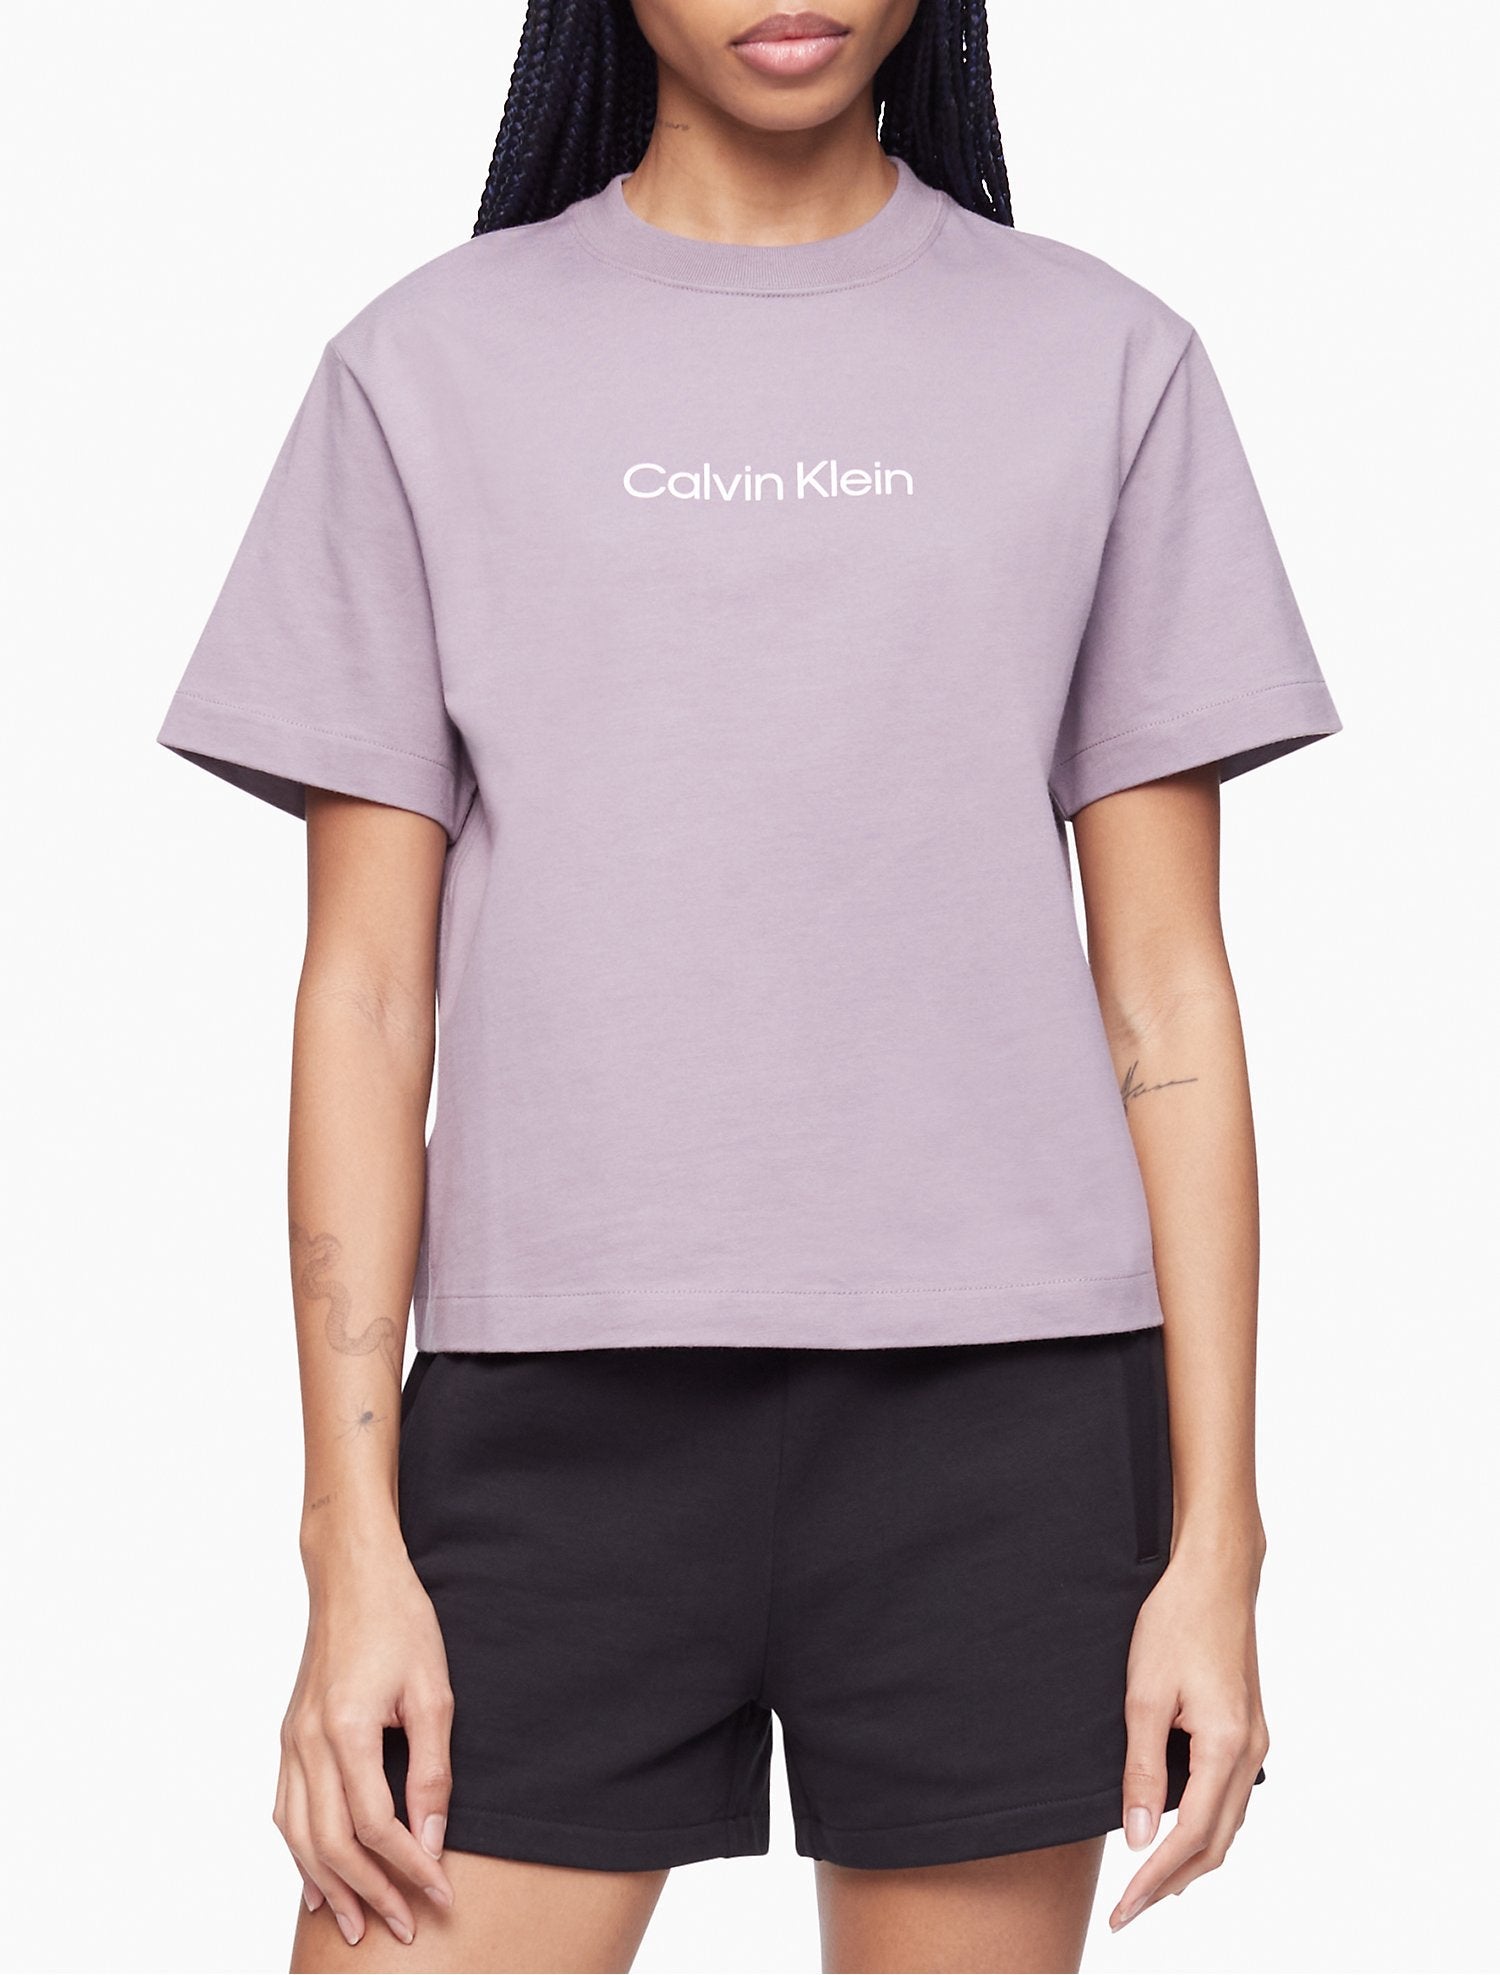 Calvin Klein Color Relaxed Fit Standard Logo Printed Crewneck T-Shirt